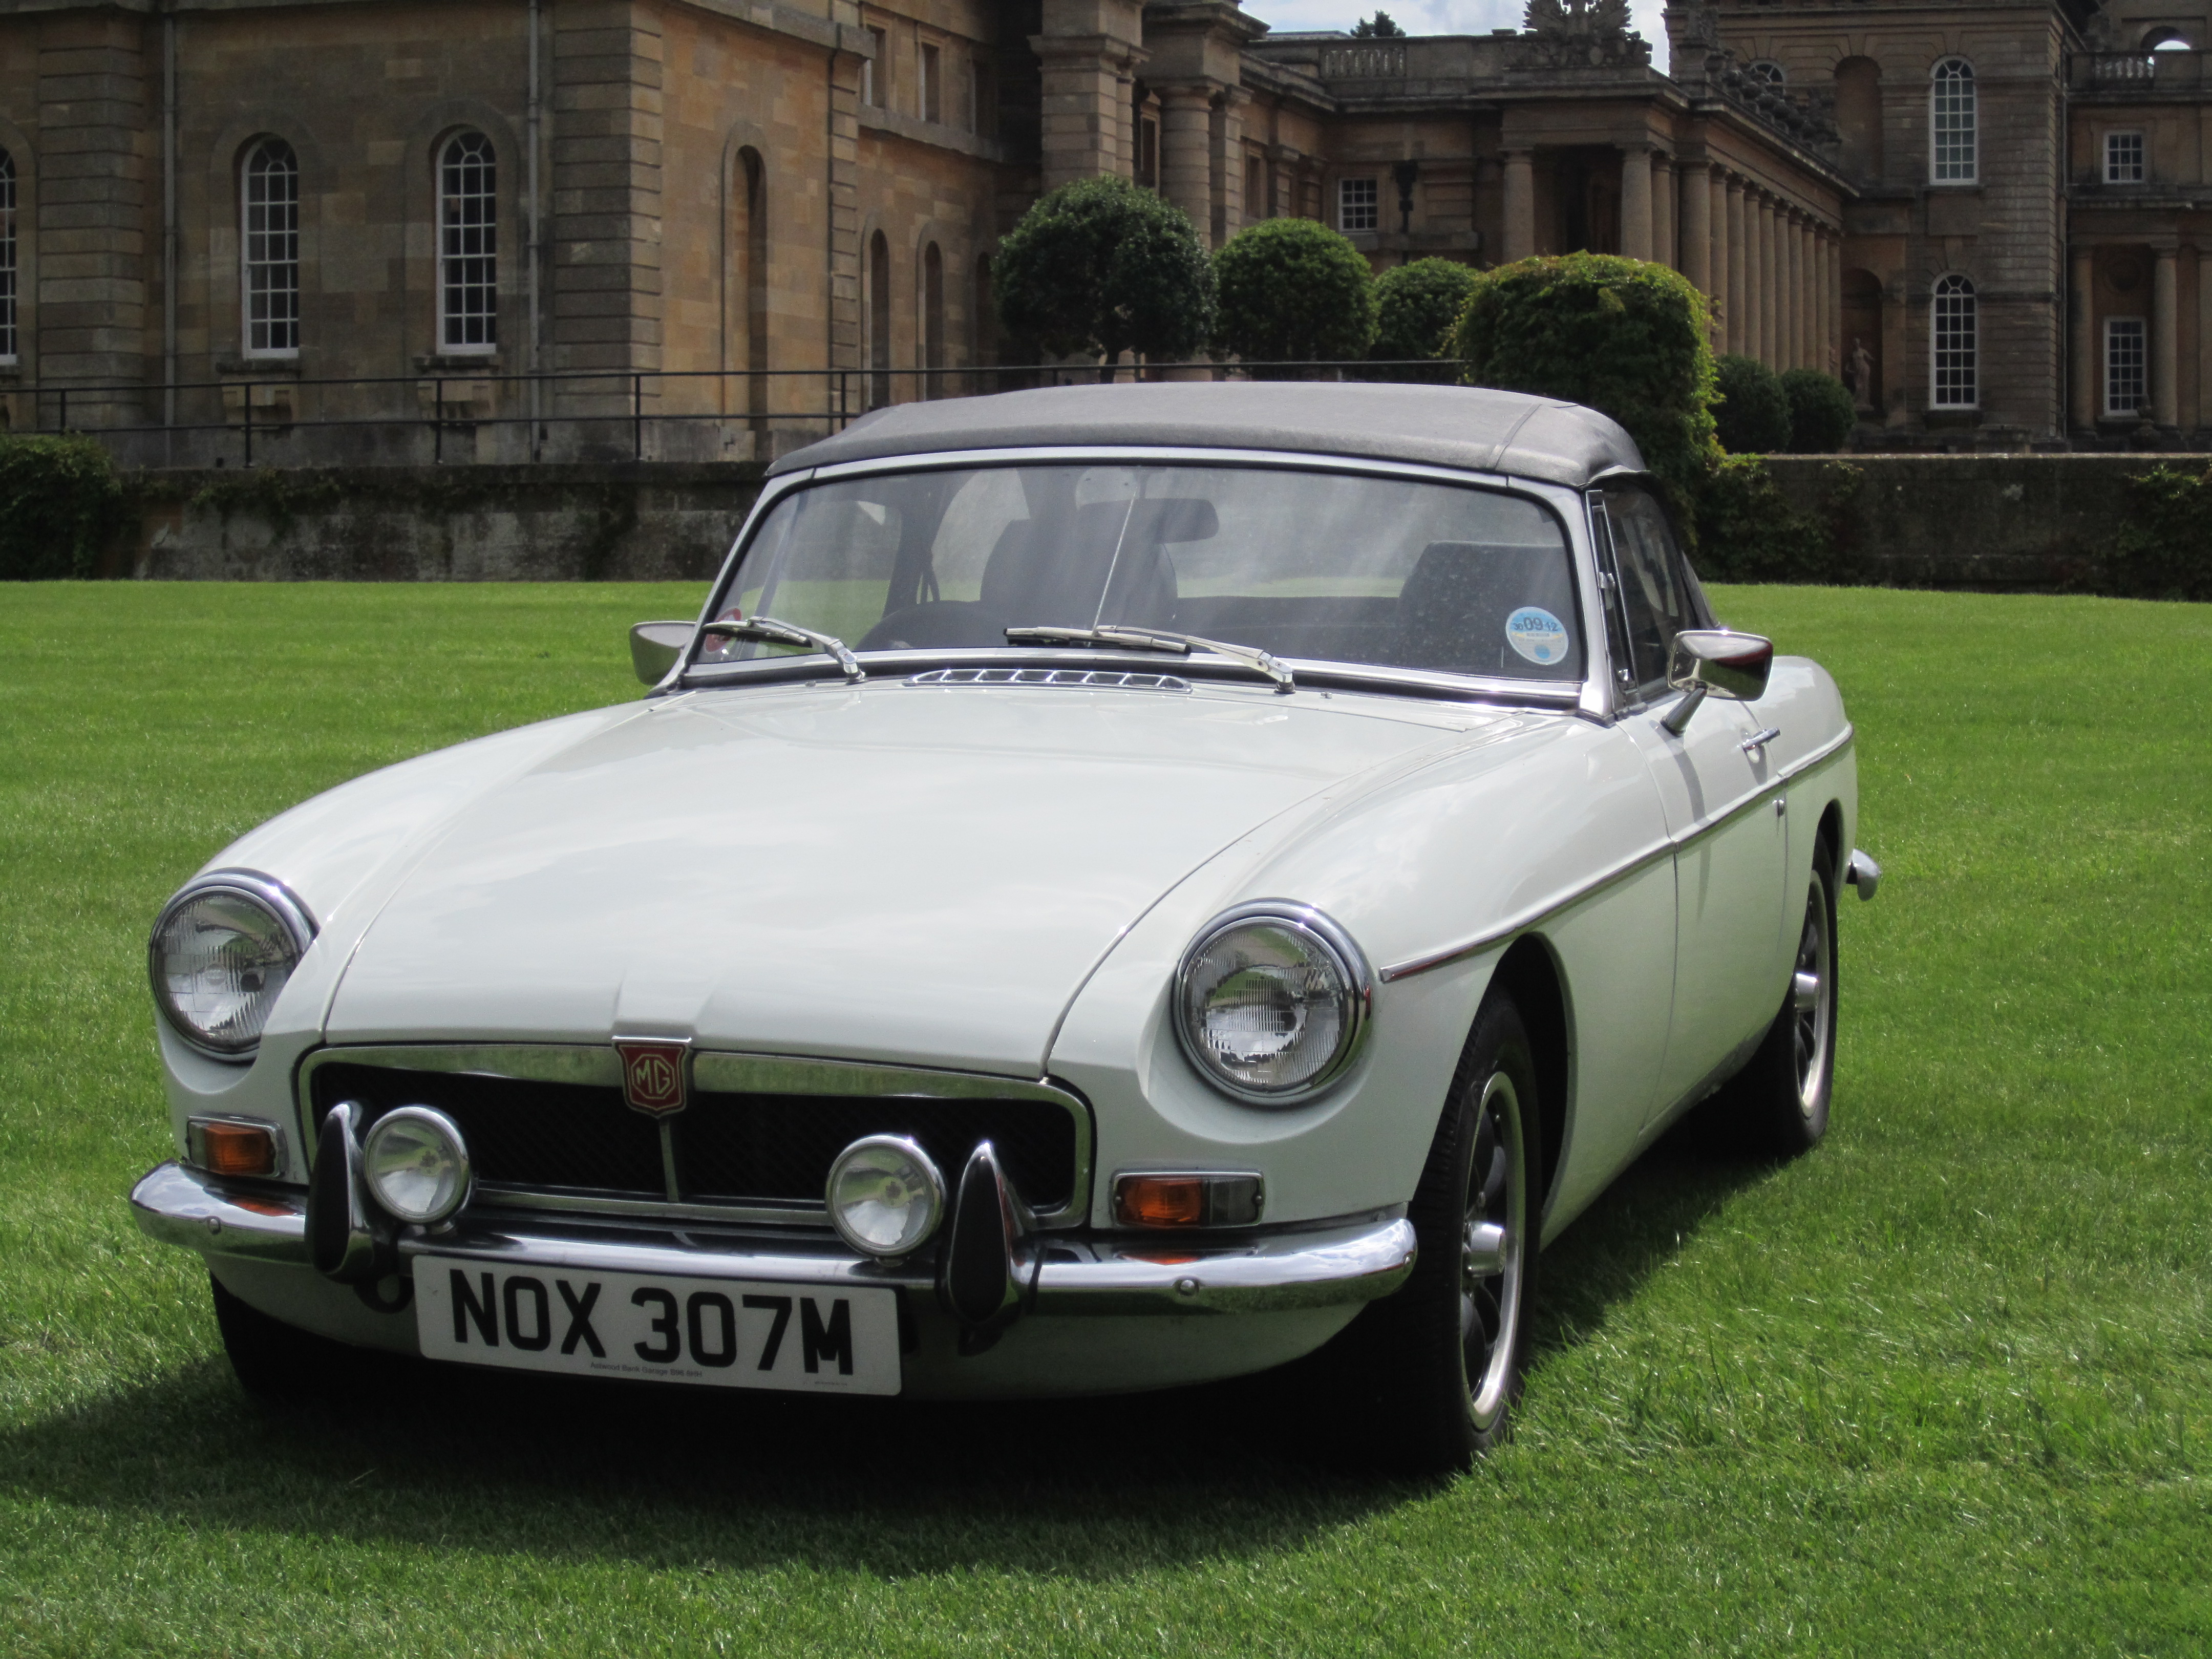 There are plenty of MGB’s available so get the right one 4U